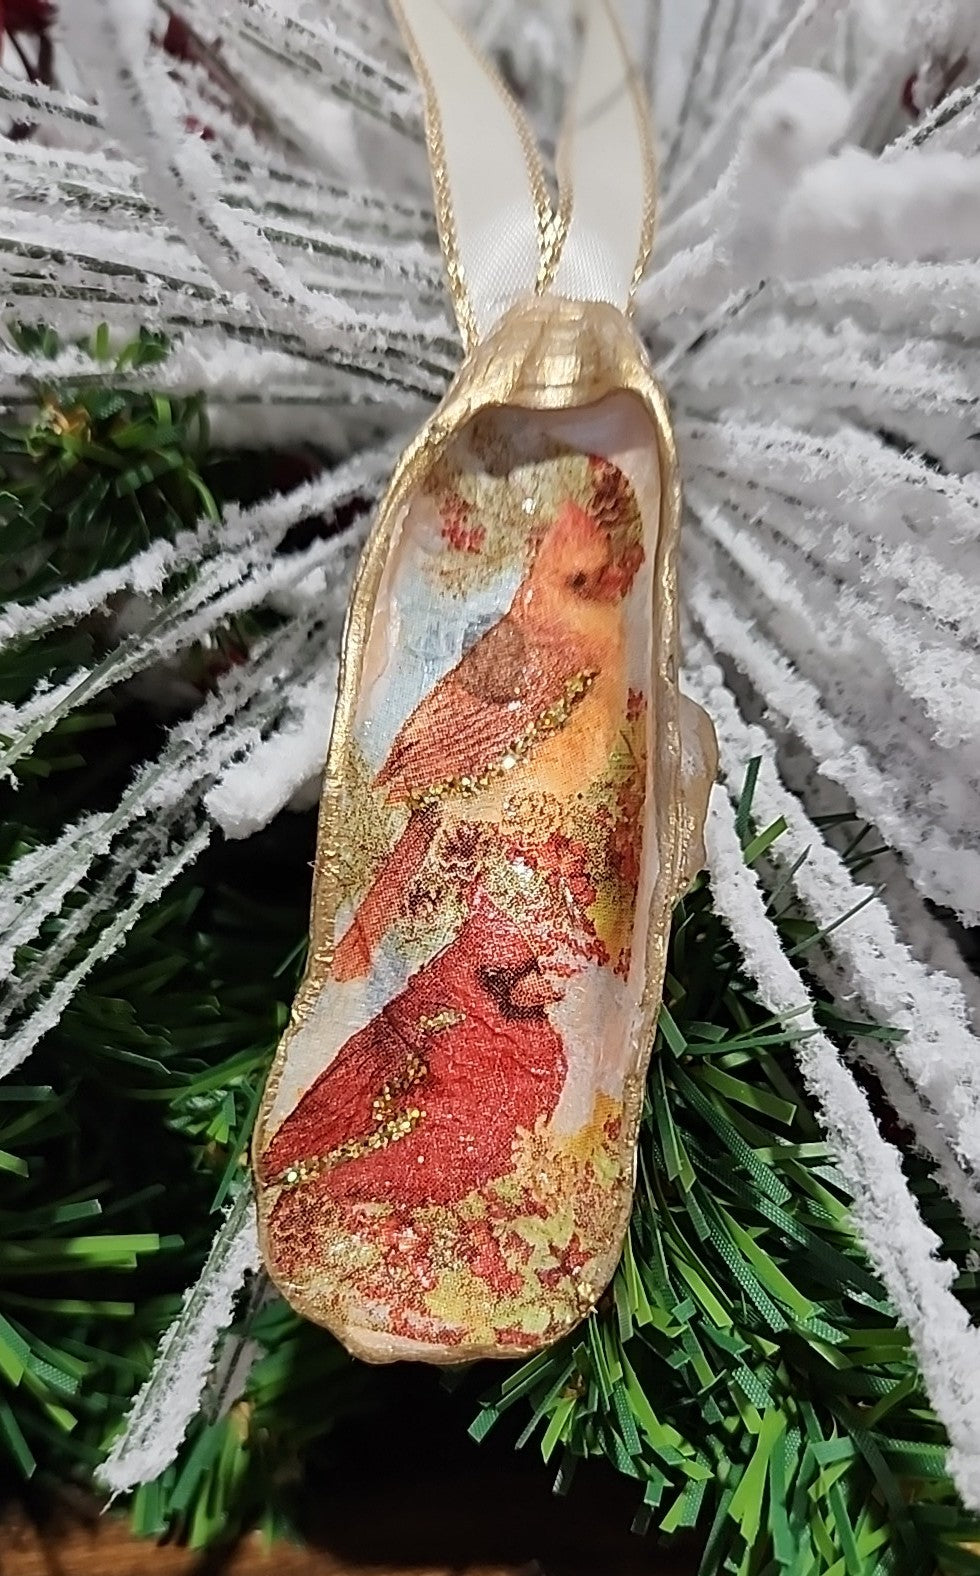 Christmas Novelty Cardinal Ornament Local Oyster Shell Hand Decorated